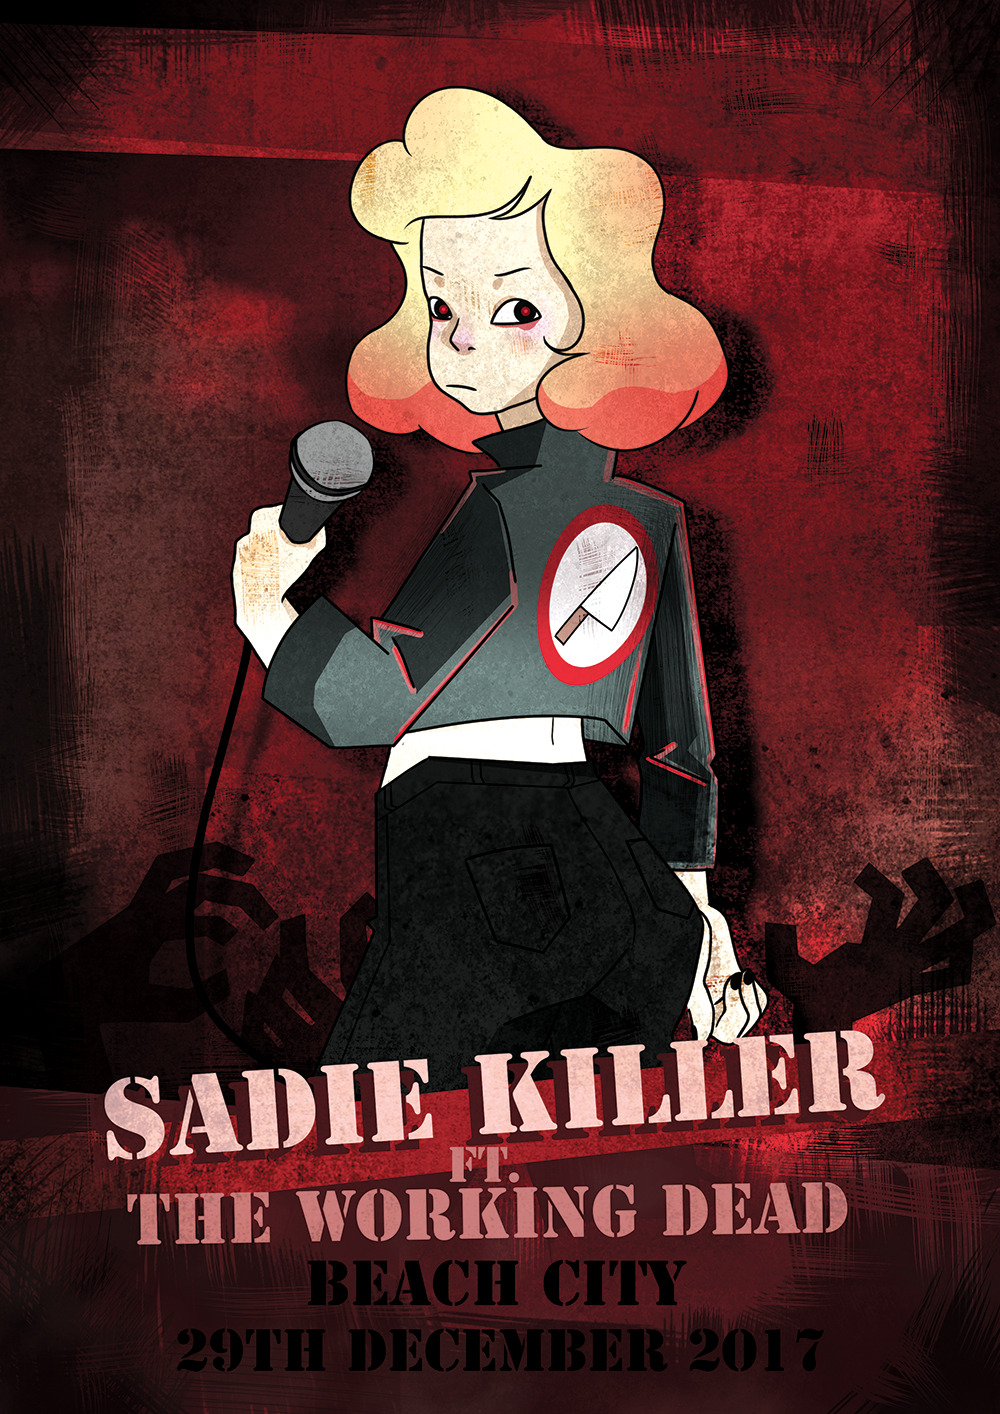 Sadie Killer and the Working Dead, coming to a city near you! Will be available as a print at deecon!